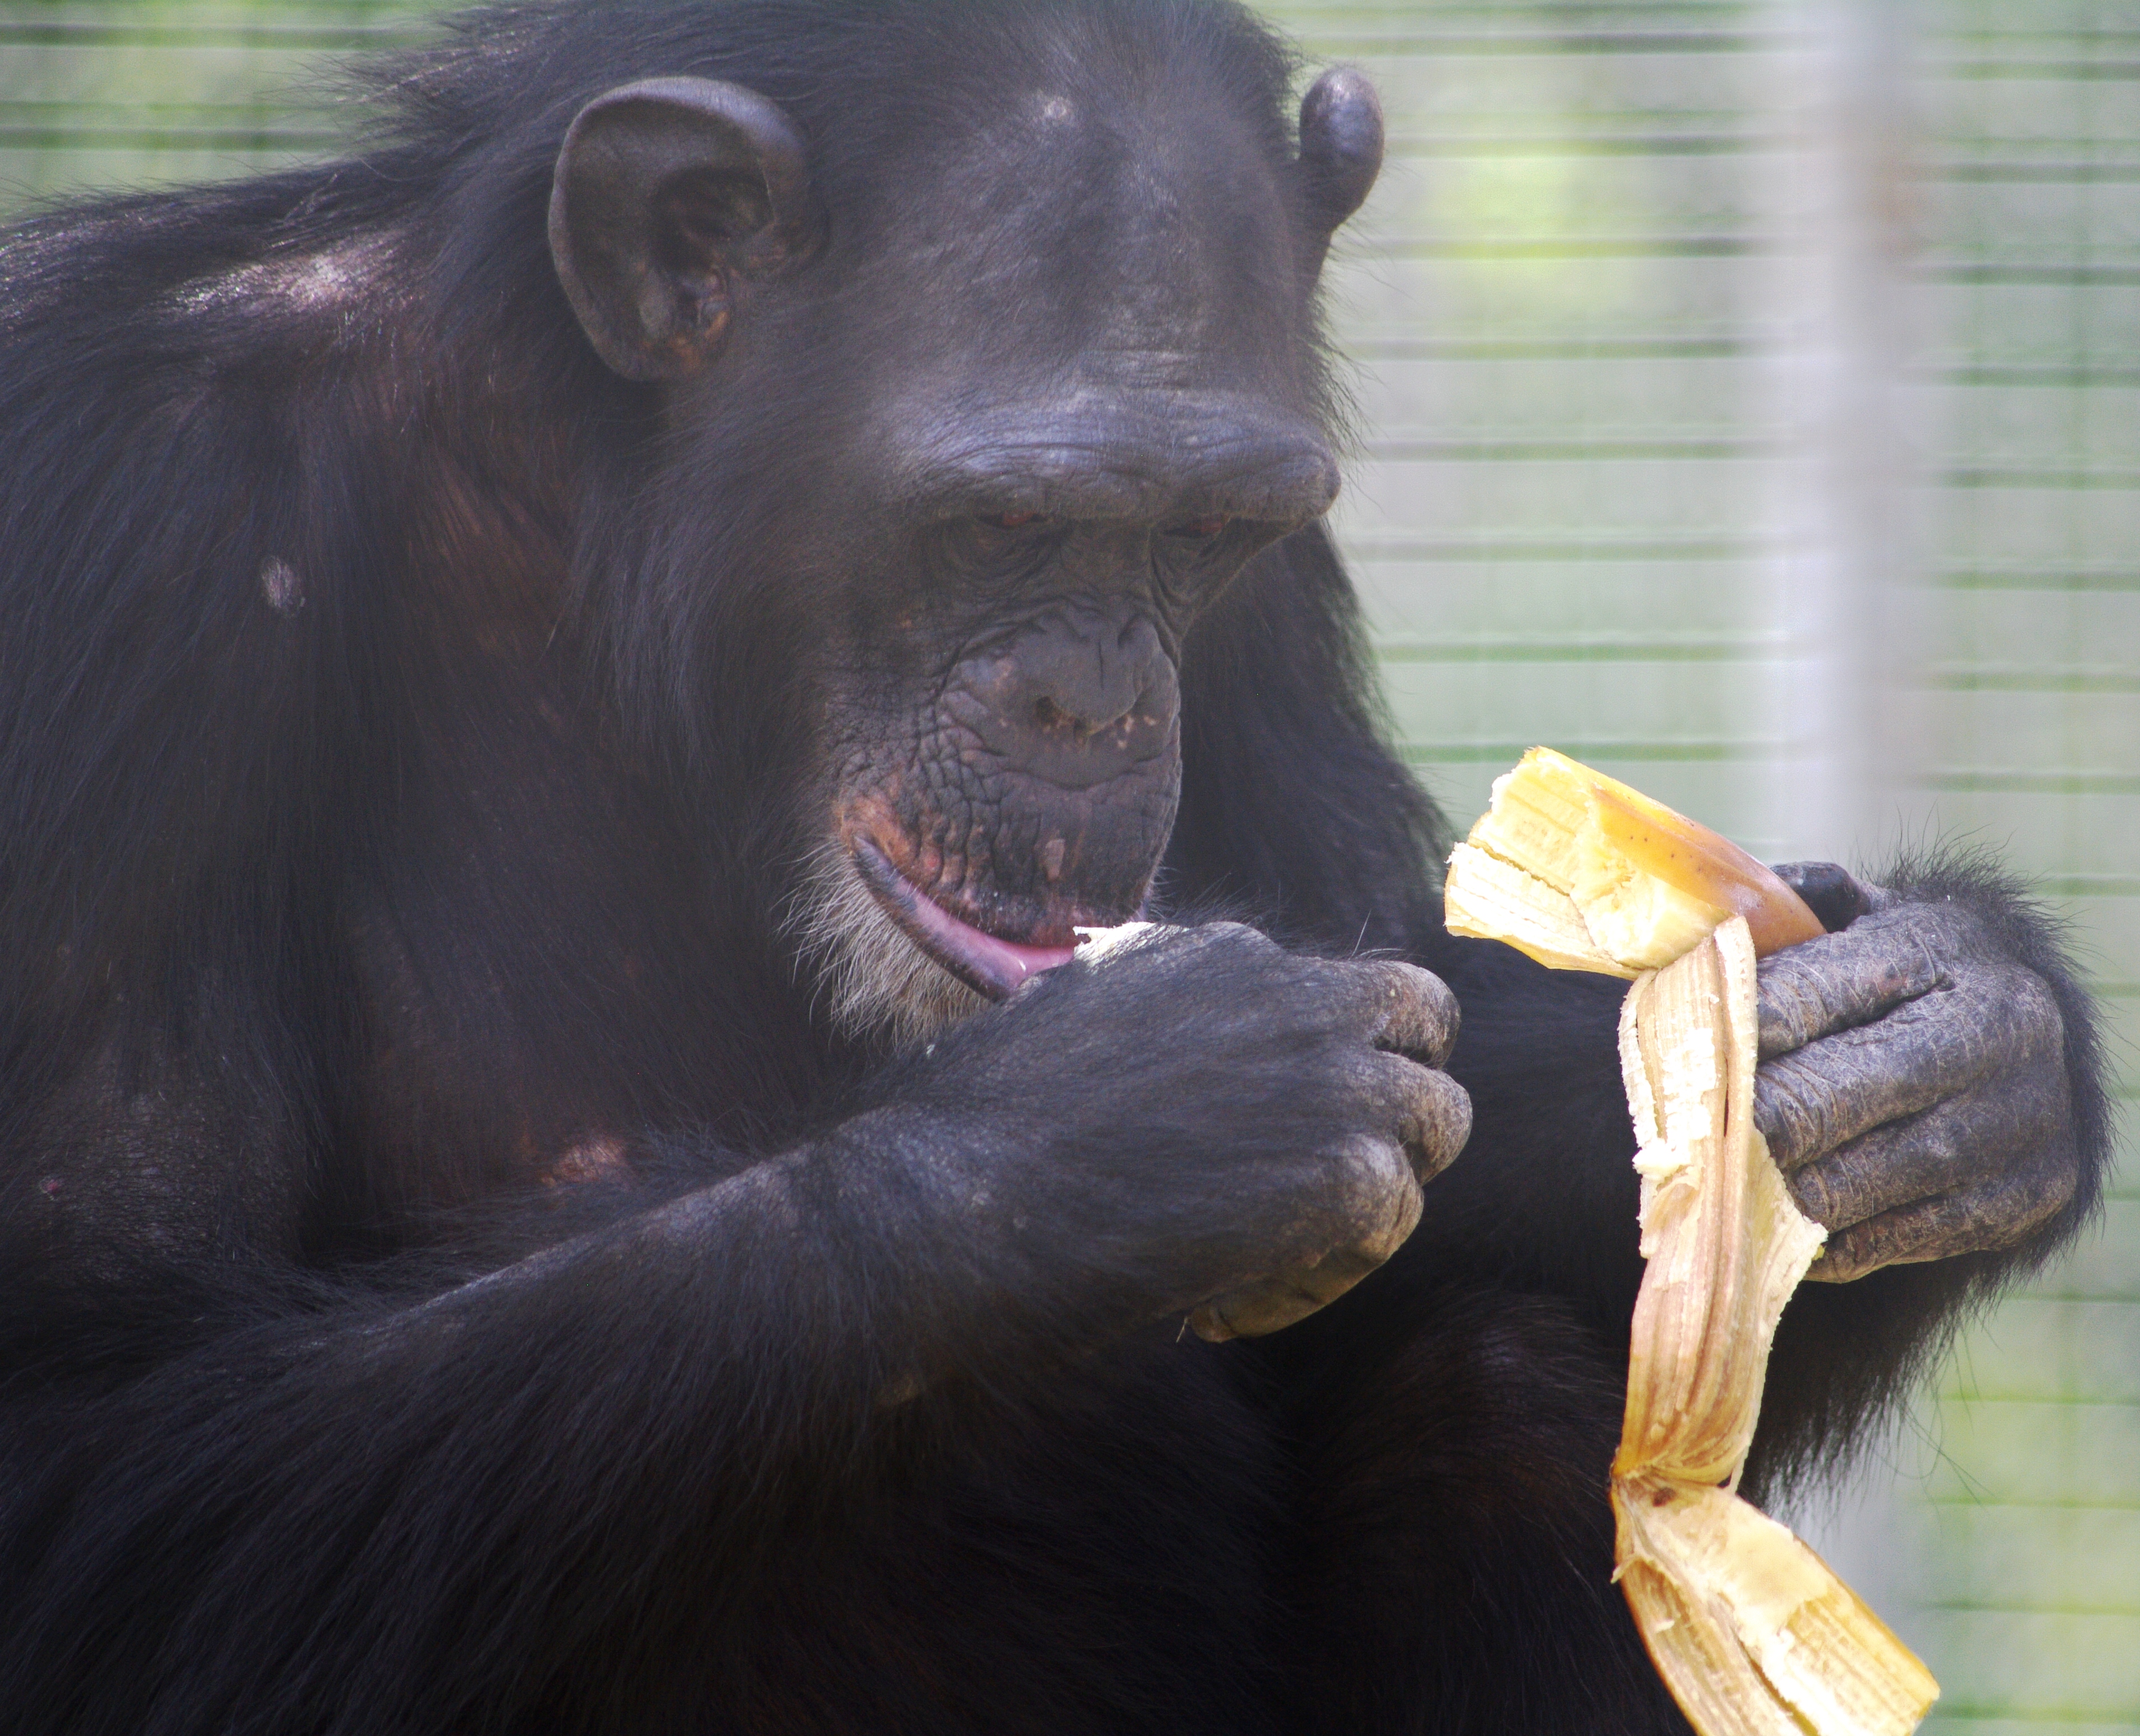 A chimp holding an empty banana peel in his left hand, with the banana in his right hand positioned close to his mouth